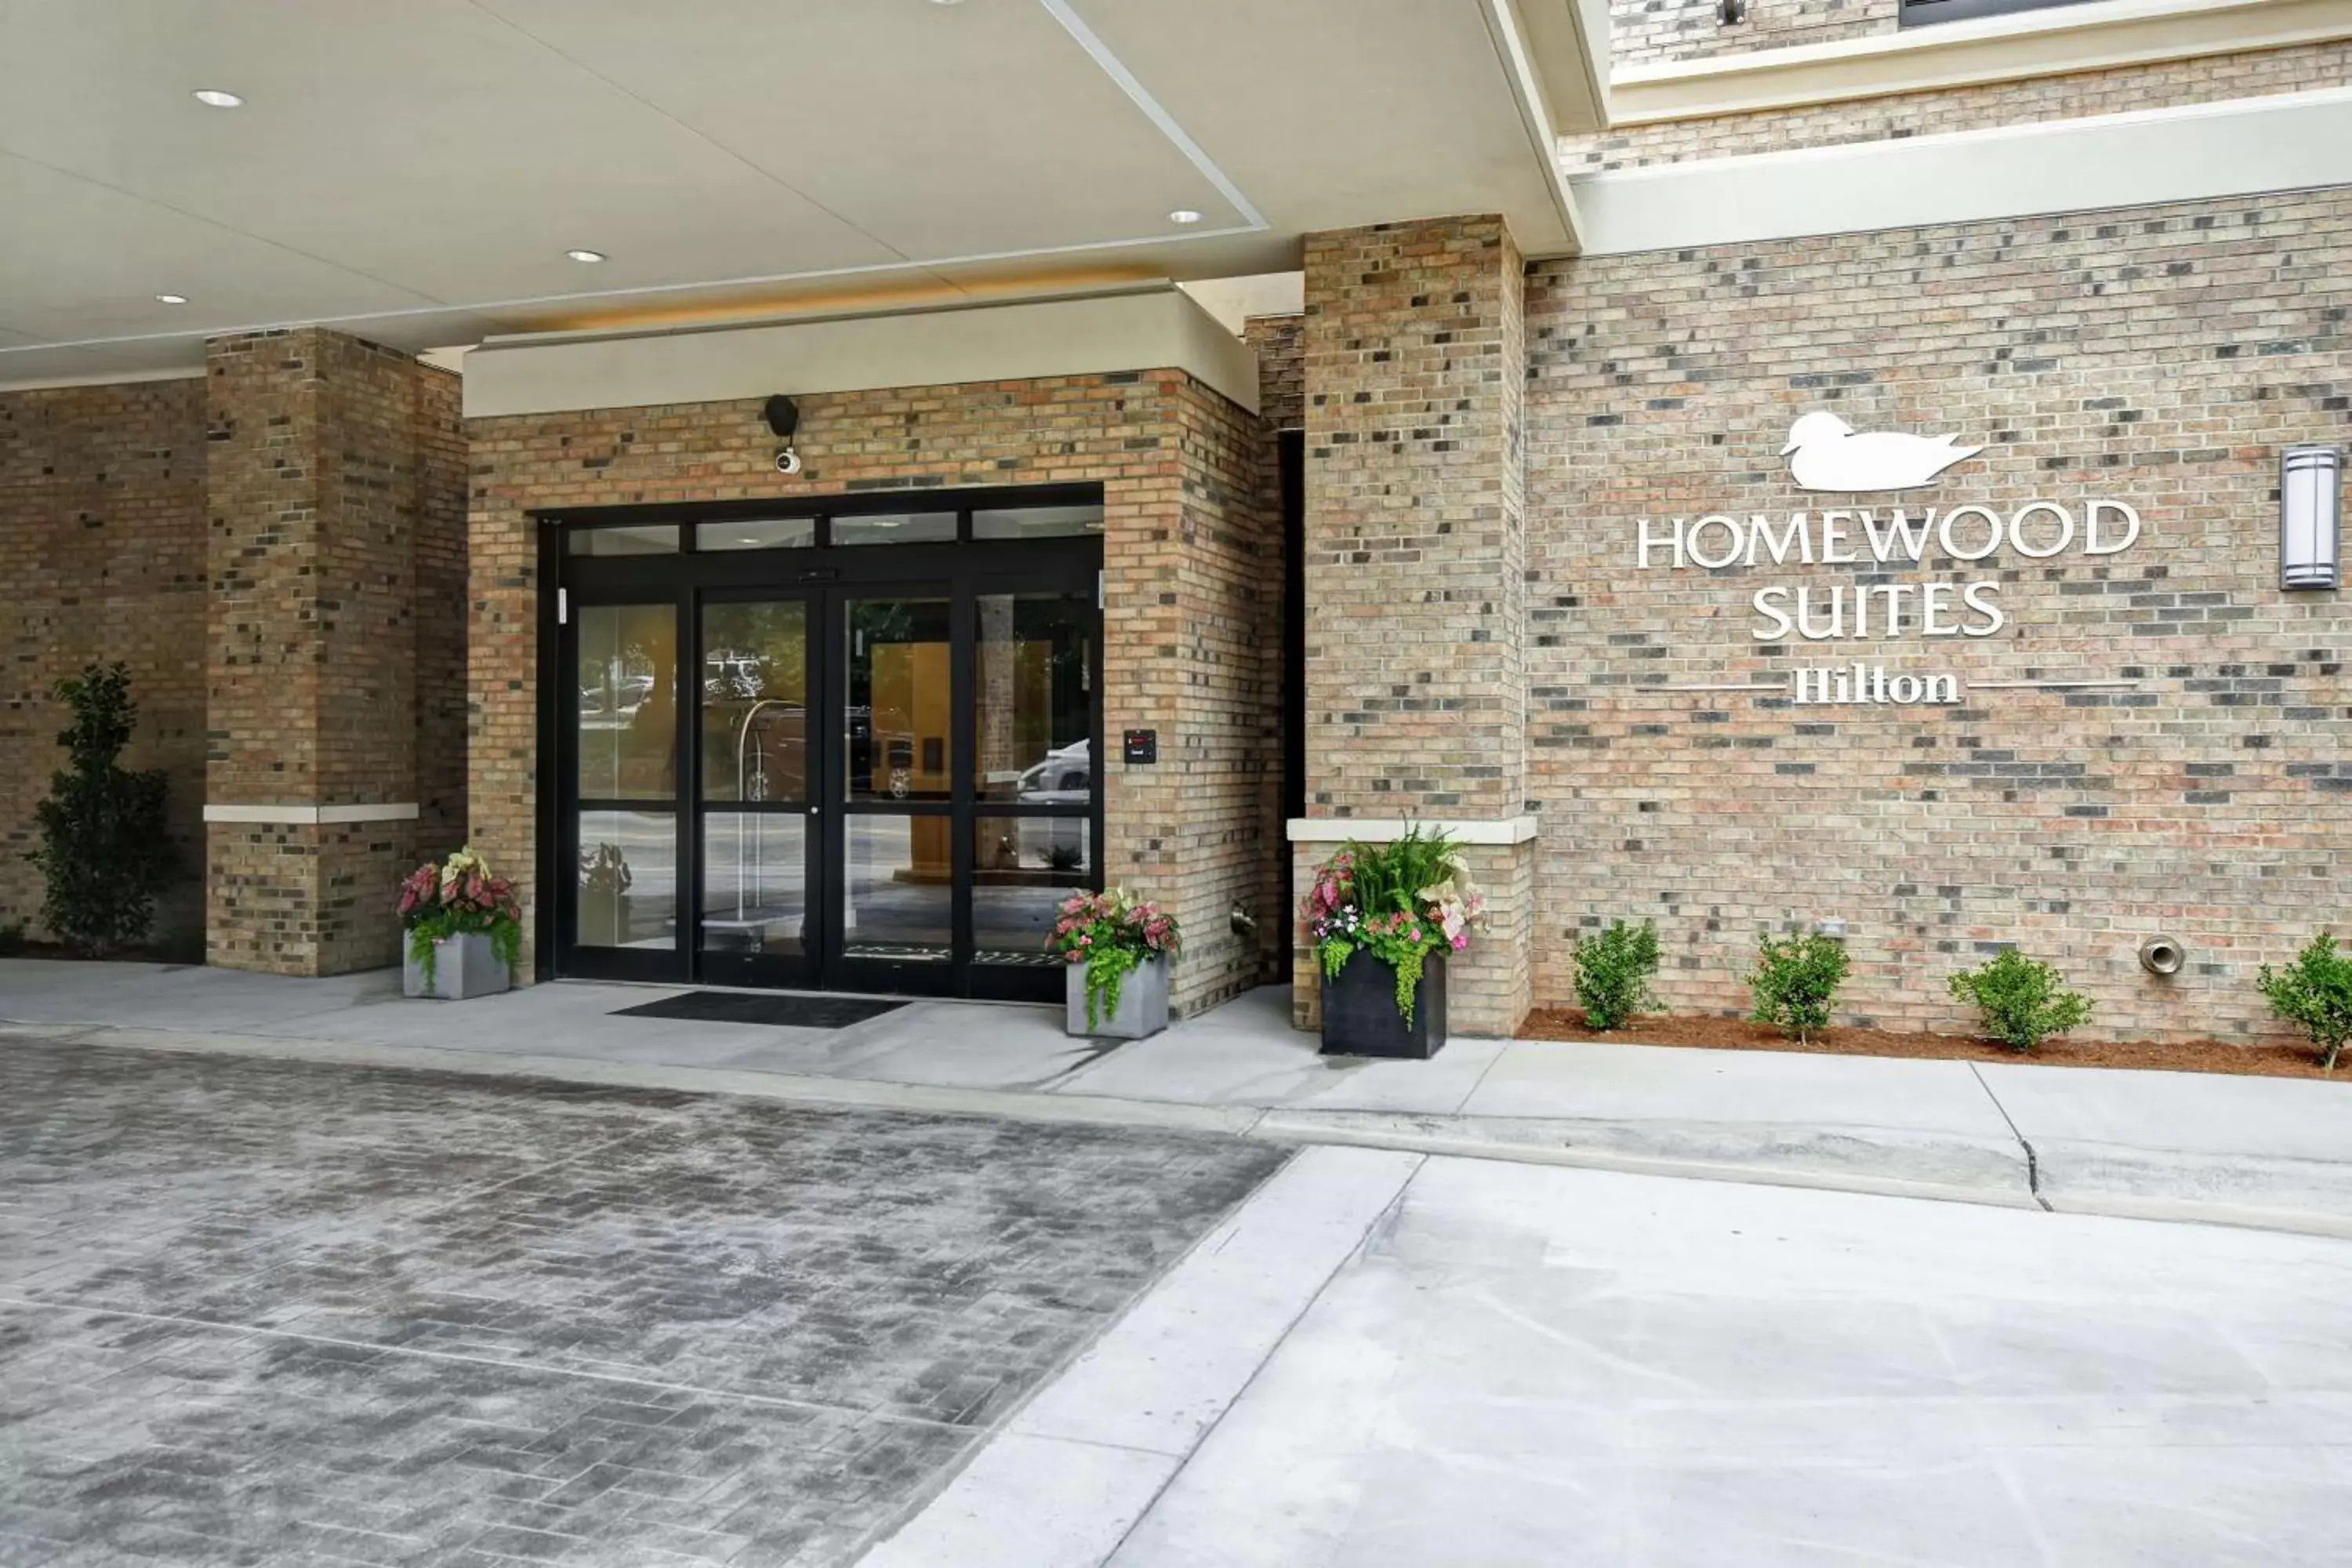 Property building in Homewood Suites By Hilton Greenville Downtown